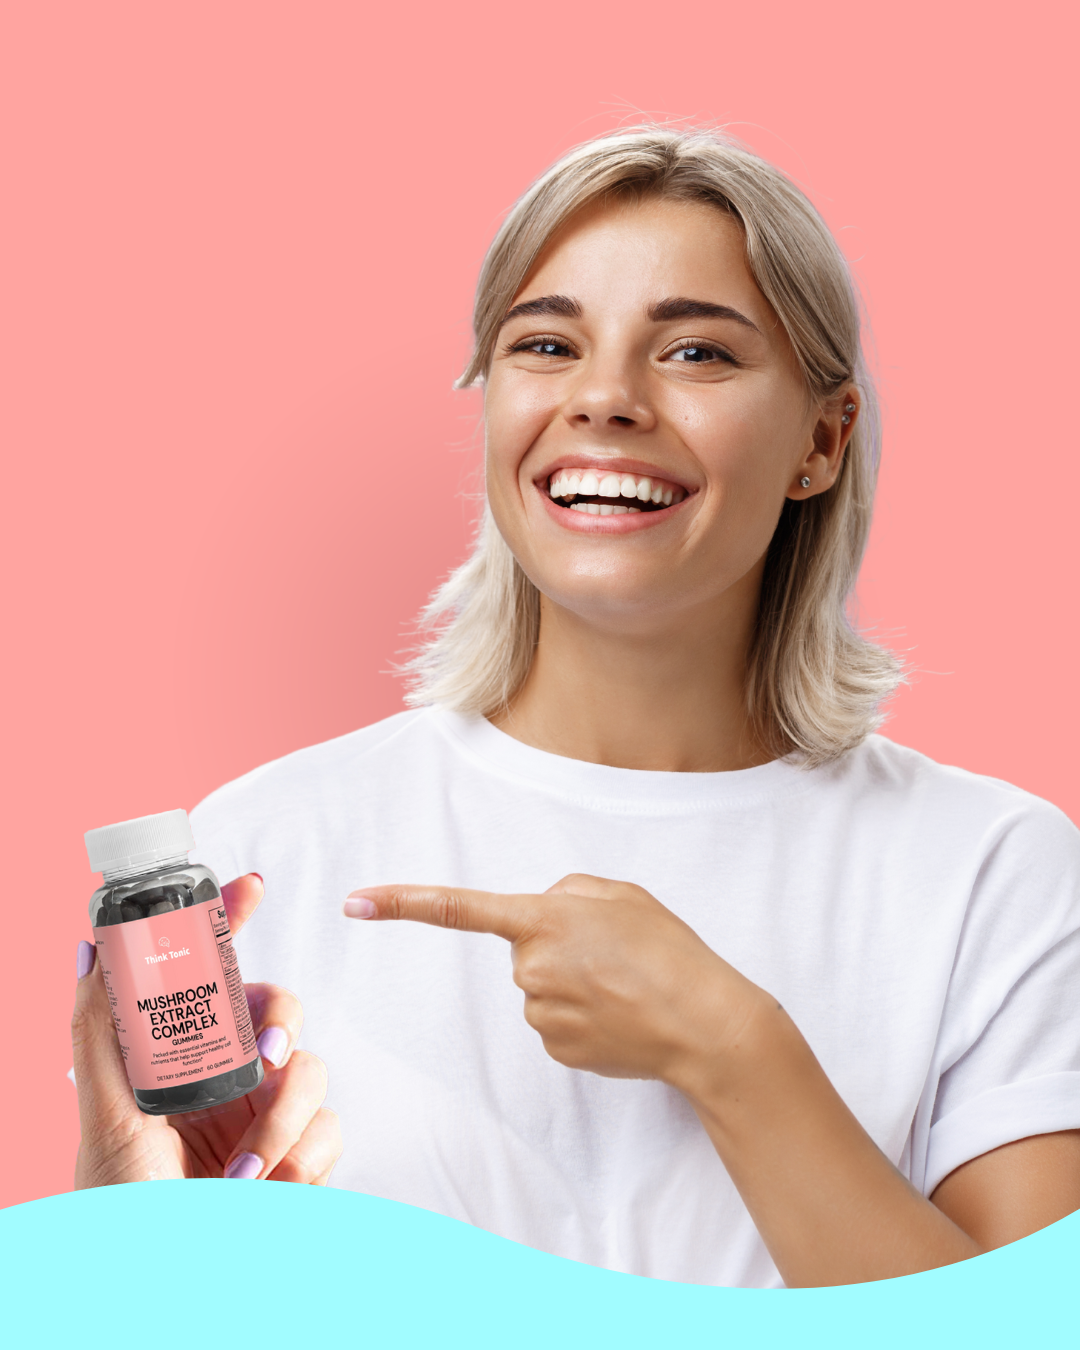 Think Tonic Mushroom Extract Gummies displayed by smiling woman